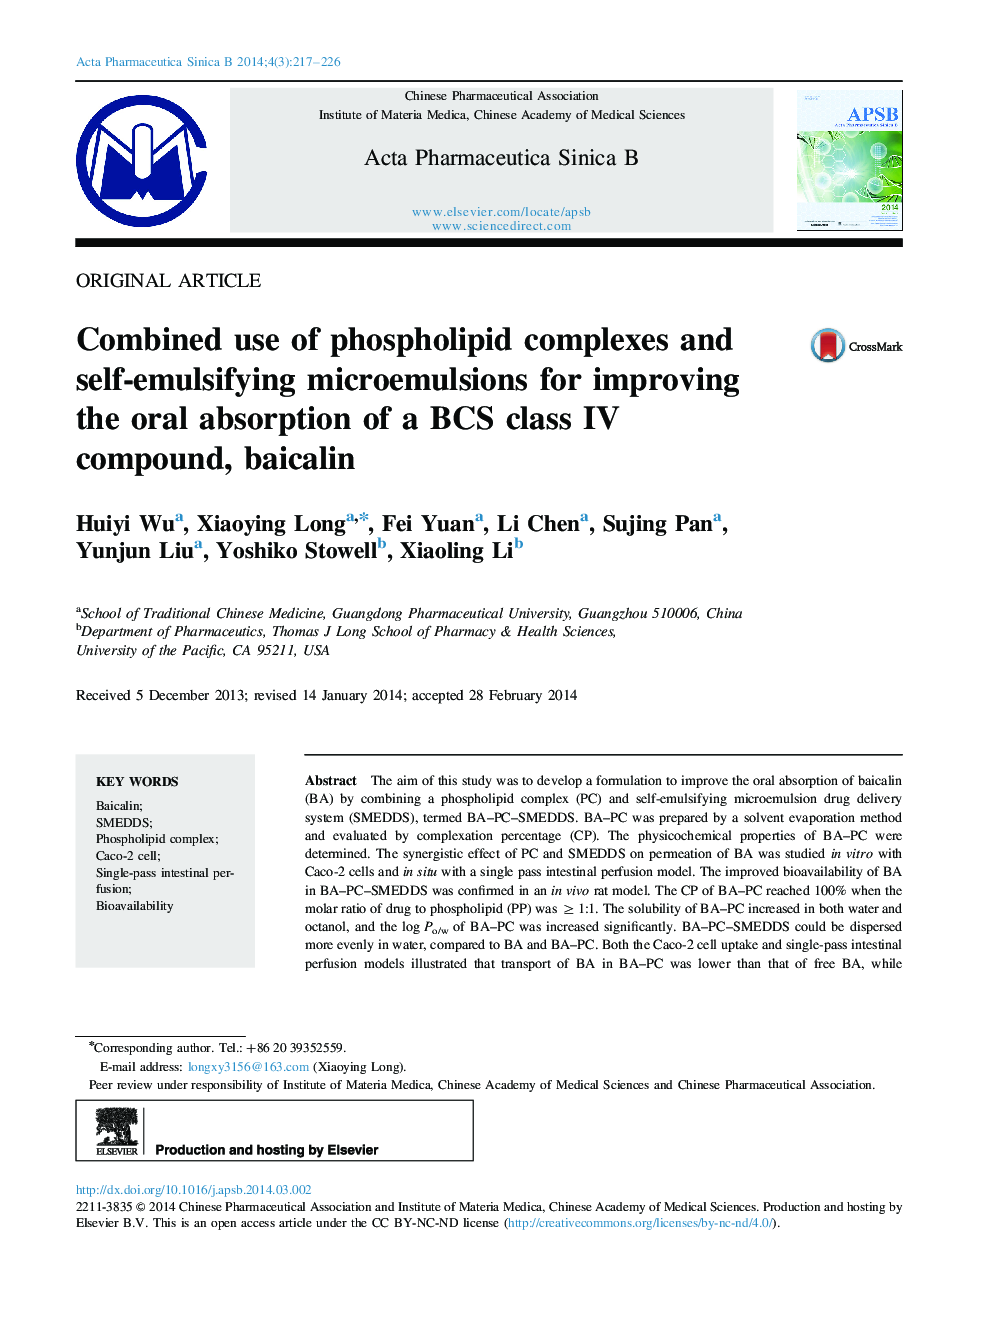 Combined use of phospholipid complexes and self-emulsifying microemulsions for improving the oral absorption of a BCS class IV compound, baicalin 